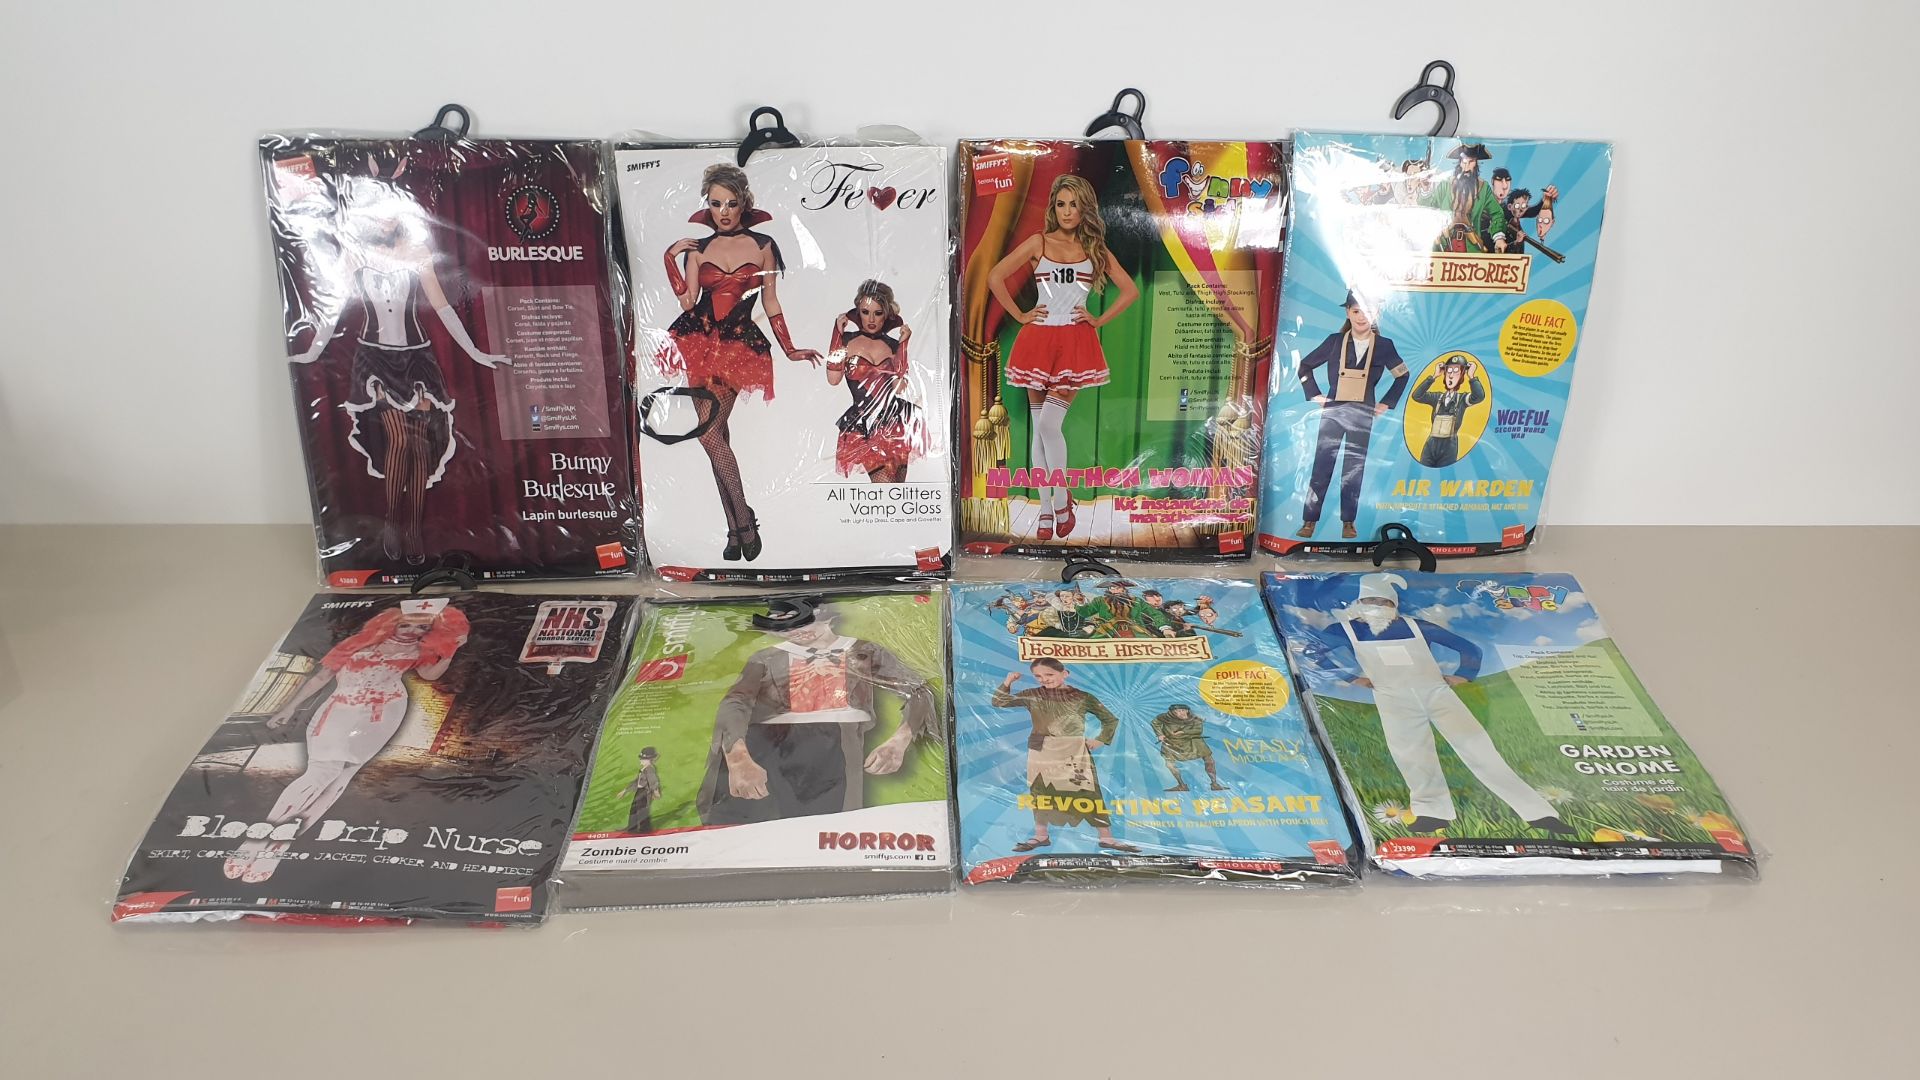 48 X BRAND NEW FANCY DRESS COSTUMES IE. SMIFFYS, FEVER - IN 2 CARTONS